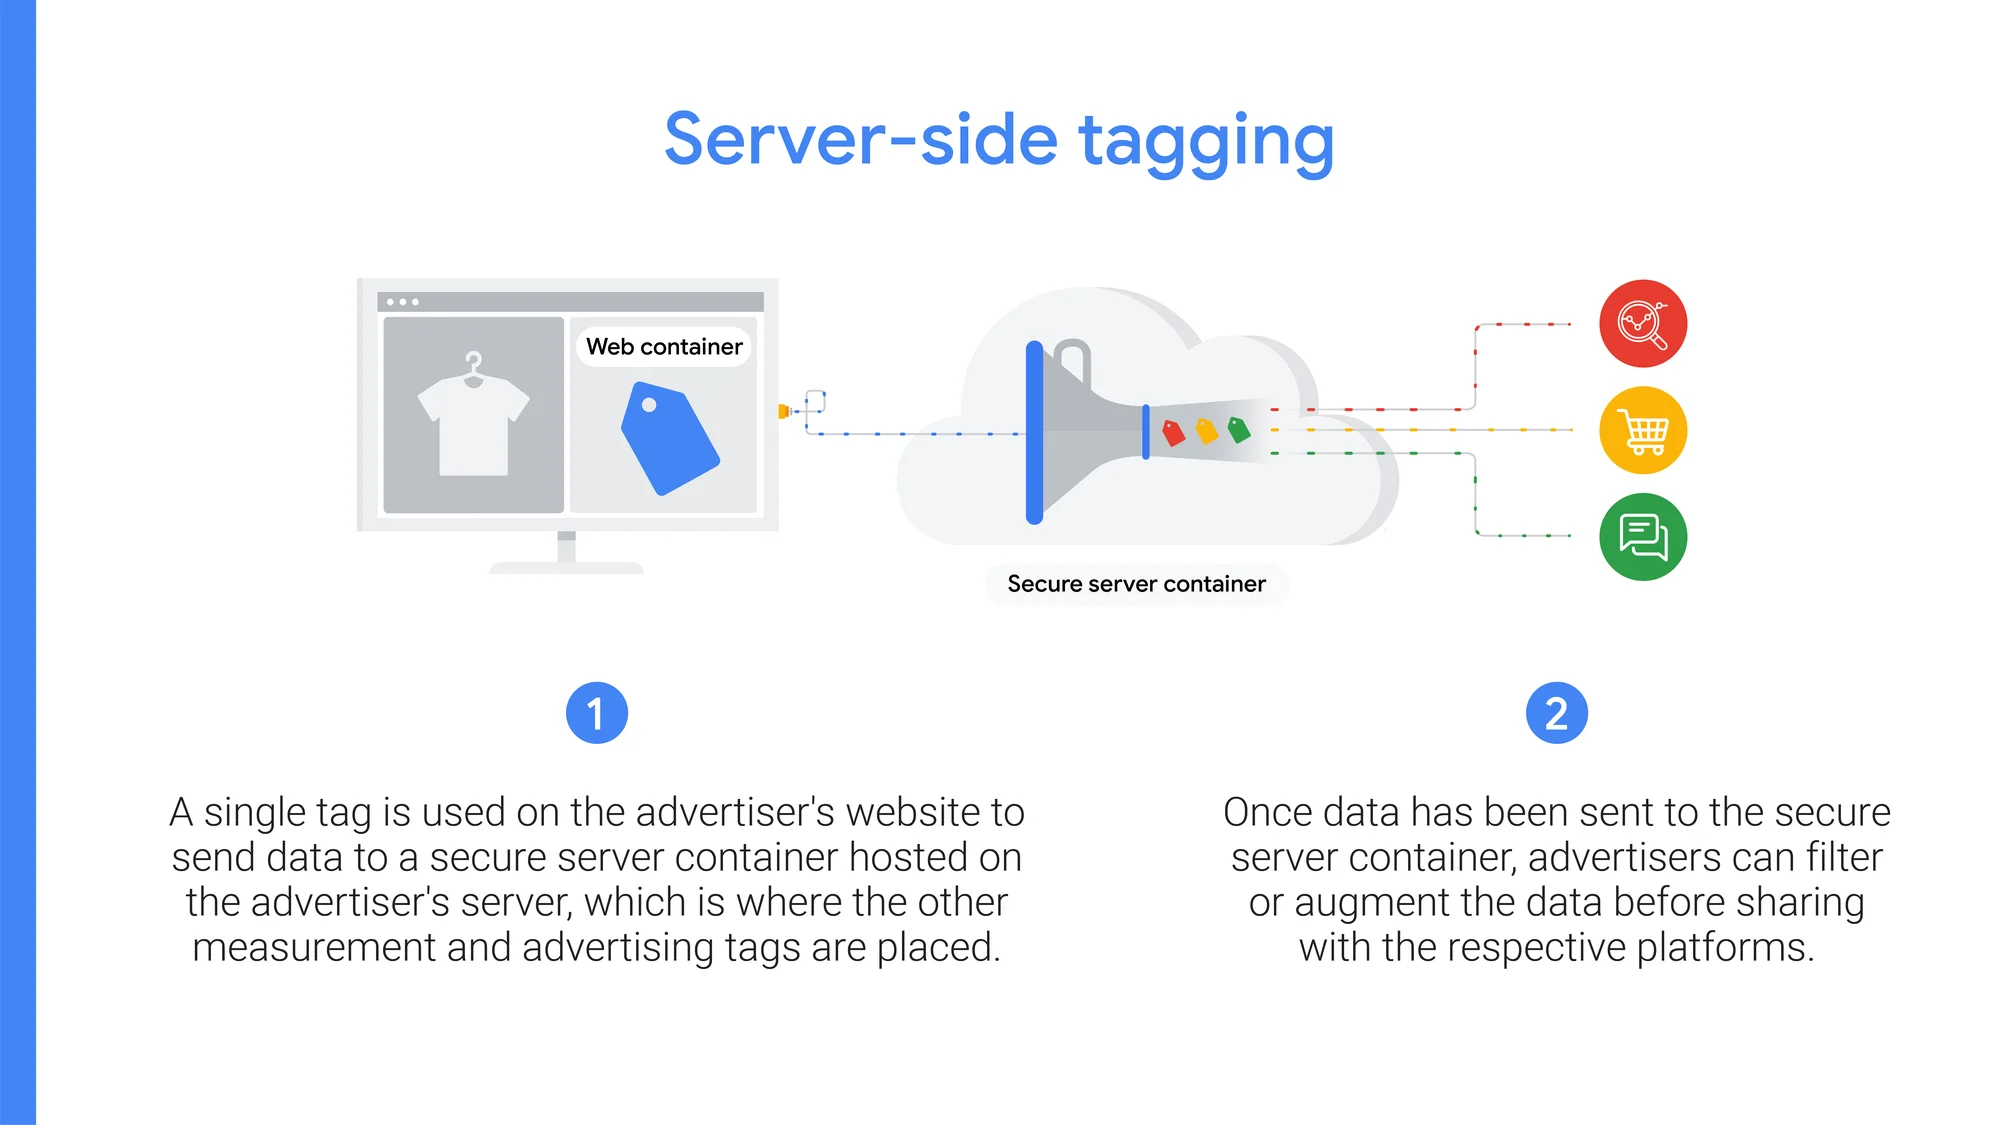 A slide that explains server-side tagging using images of a consumer shopping site using one tag to send data to a server container then the secure server sending the data to respective platforms.